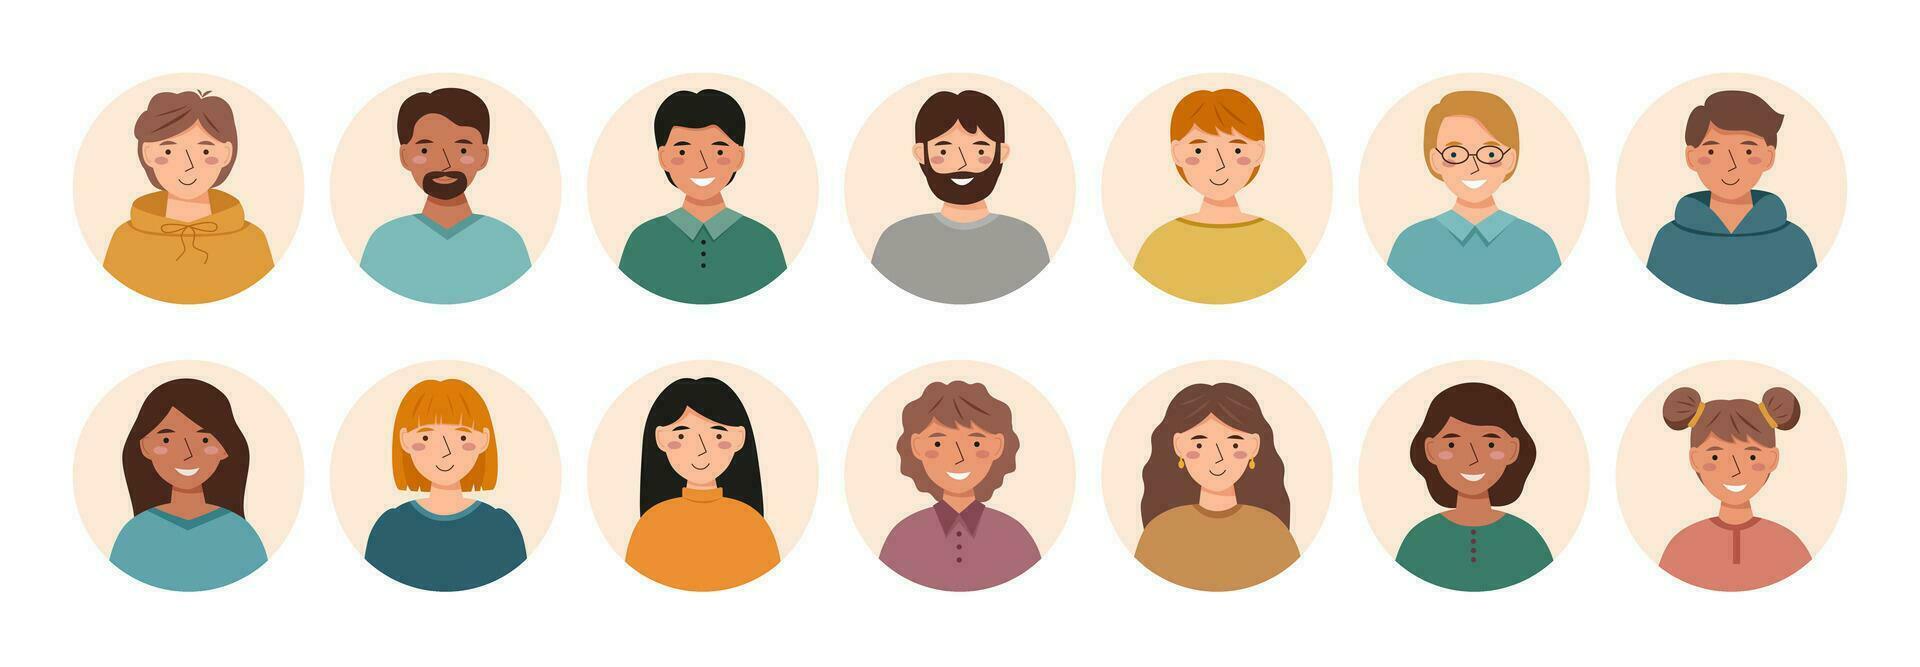 People avatars collection vector